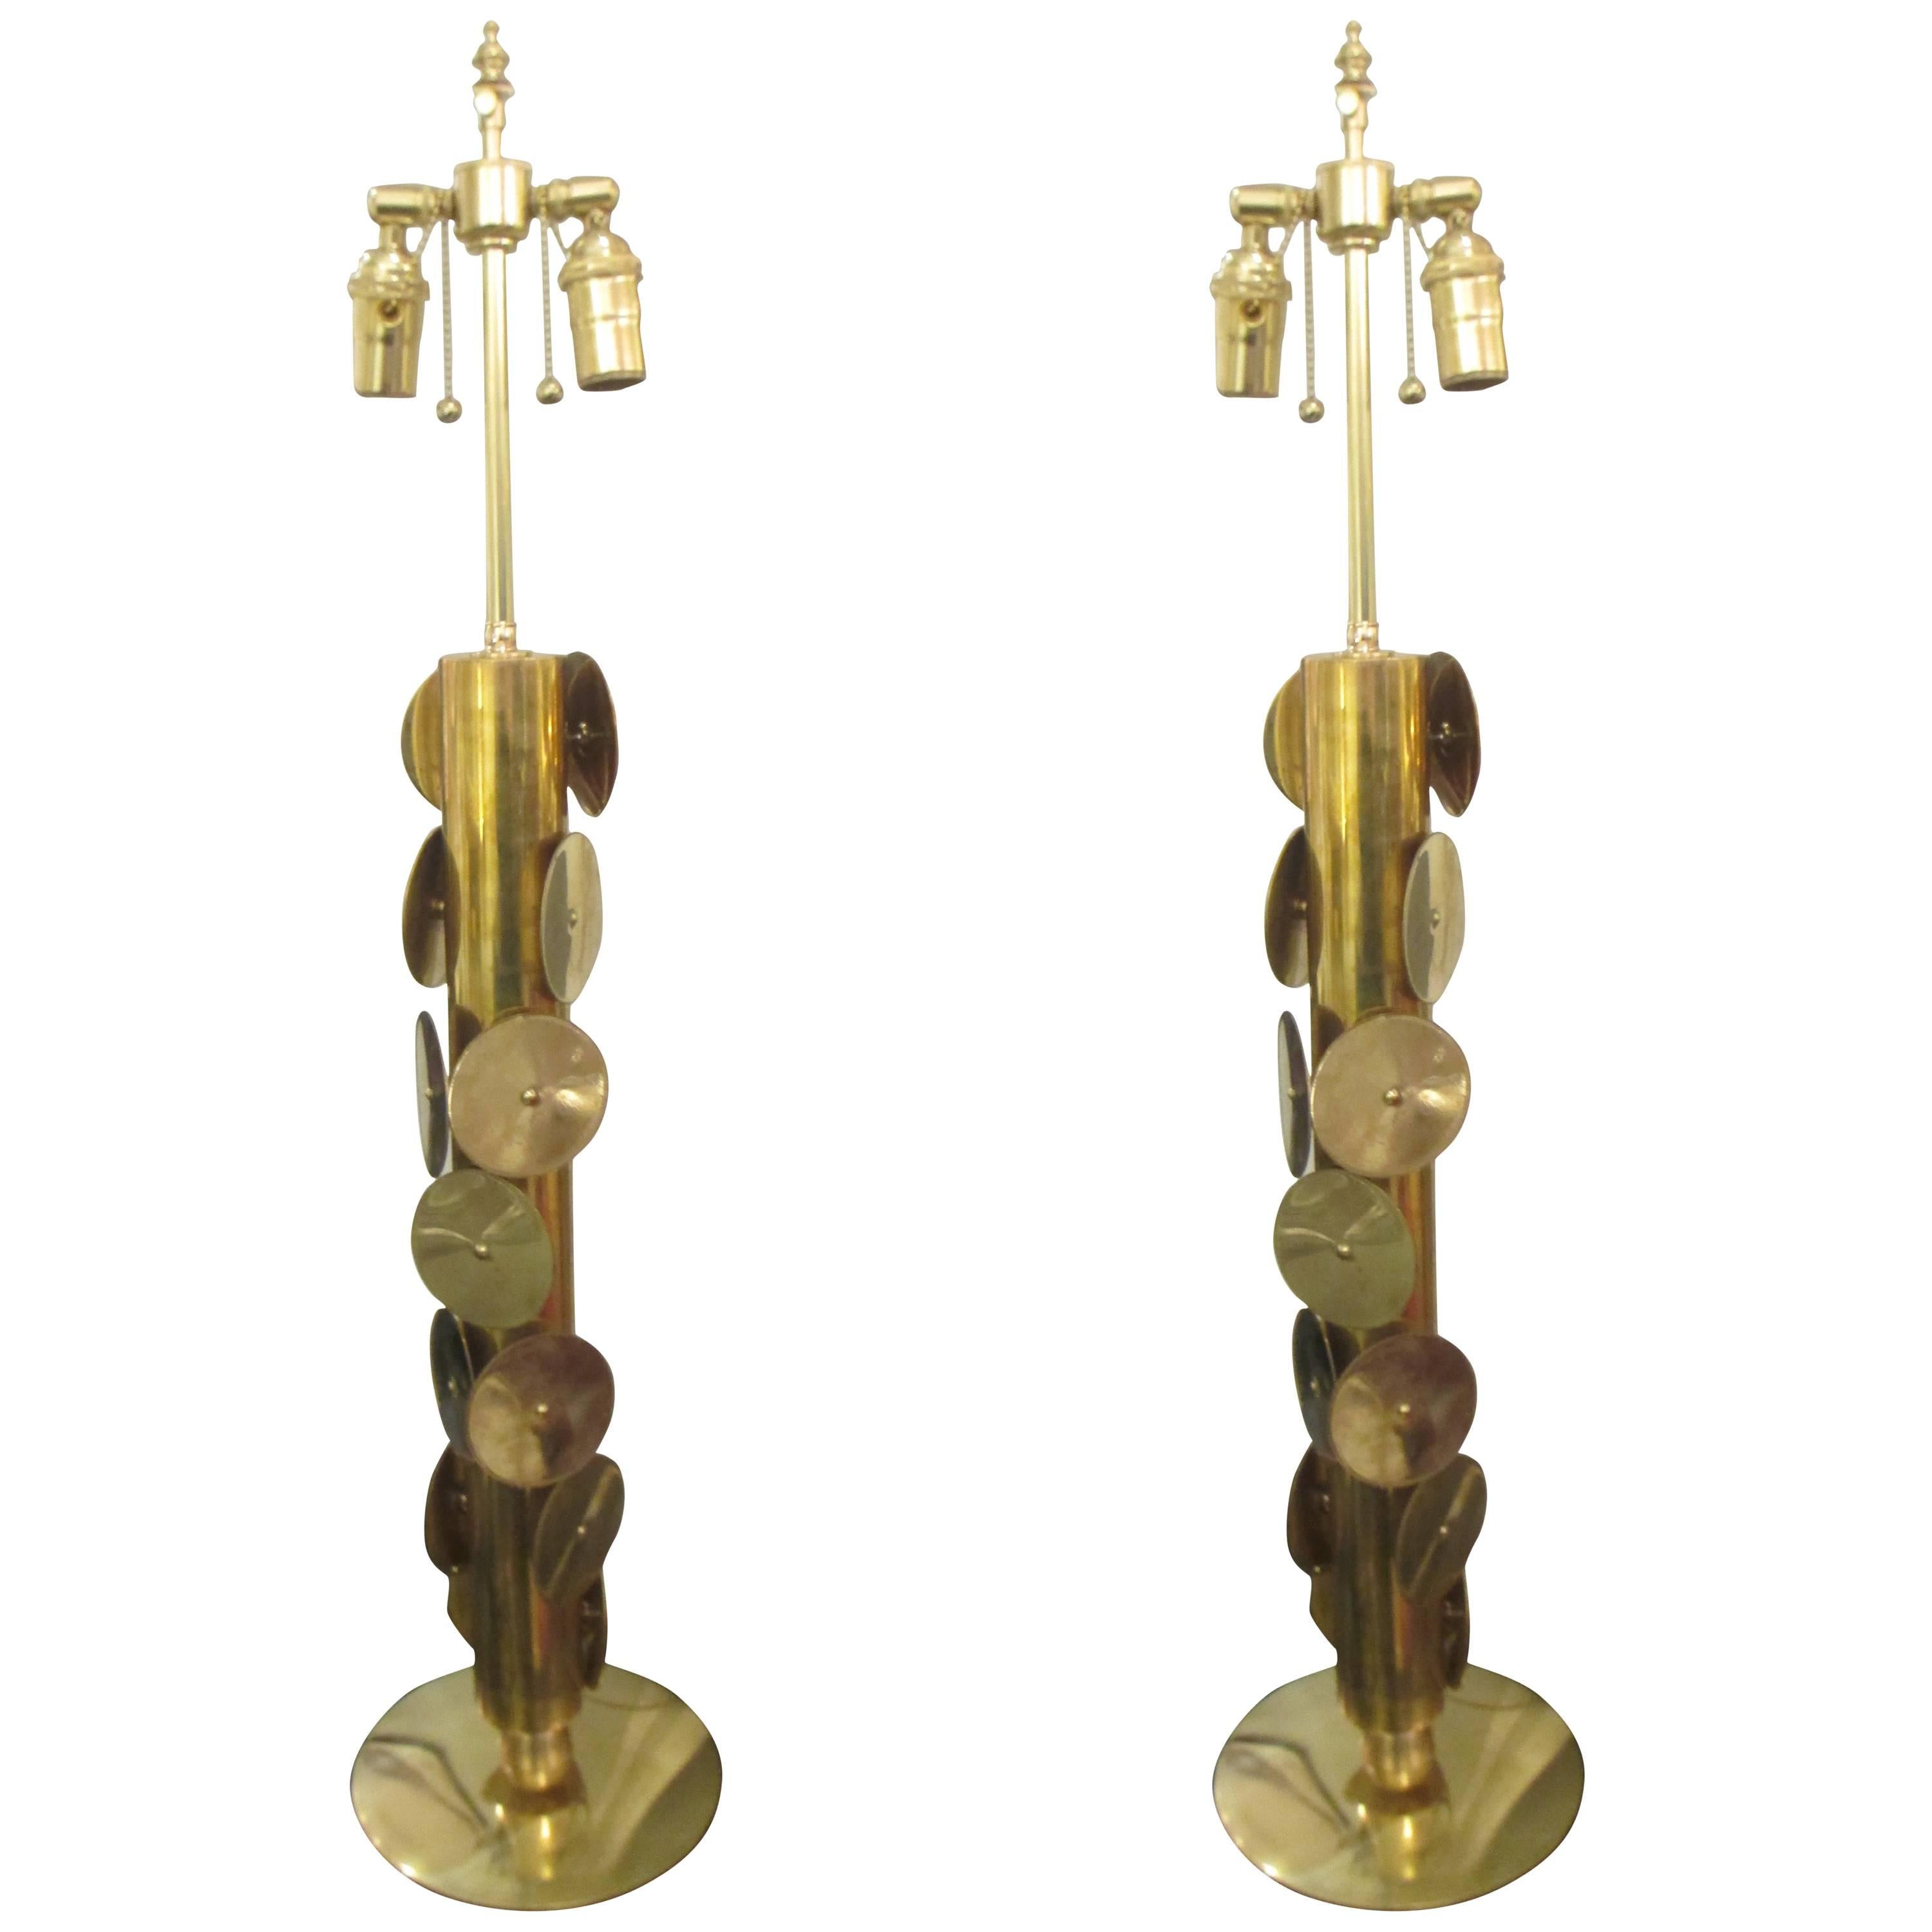 Pair of custom brass lamps with circular brass discs.
Lead time for custom made is 8-10 weeks.